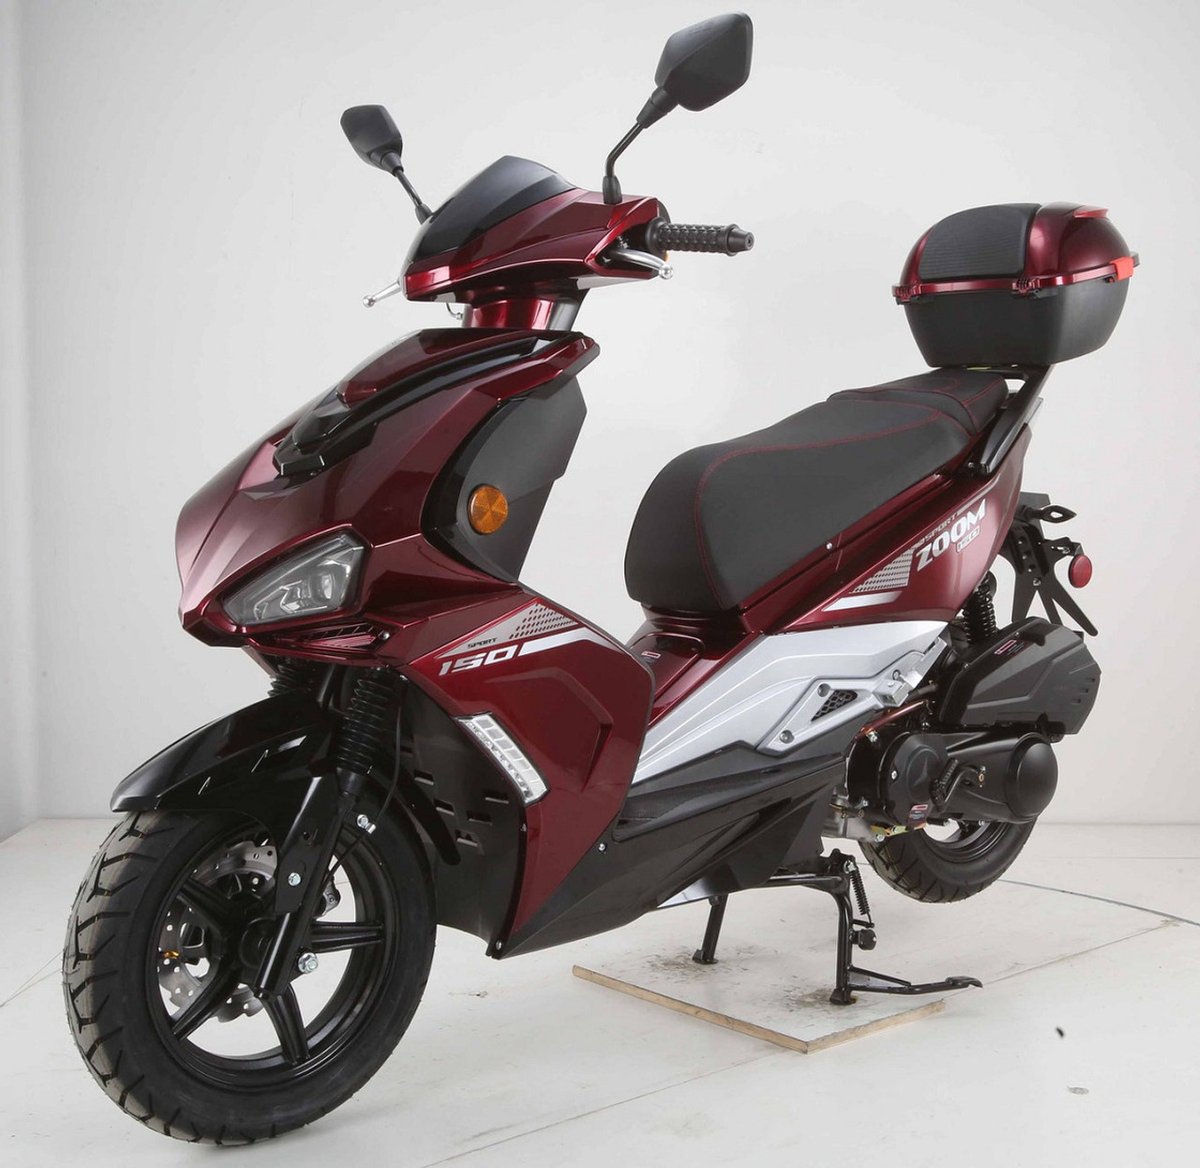 Vitacci Zoom 150Cc Scooter, GY6 4-Stroke, Air Cooled, CVT automatic
$1,206.00
Buy Now

affordableatv.com/vitacci-zoom-1…

#Vitacci #150CcScooter #4Stroke #AirCooled #automatic